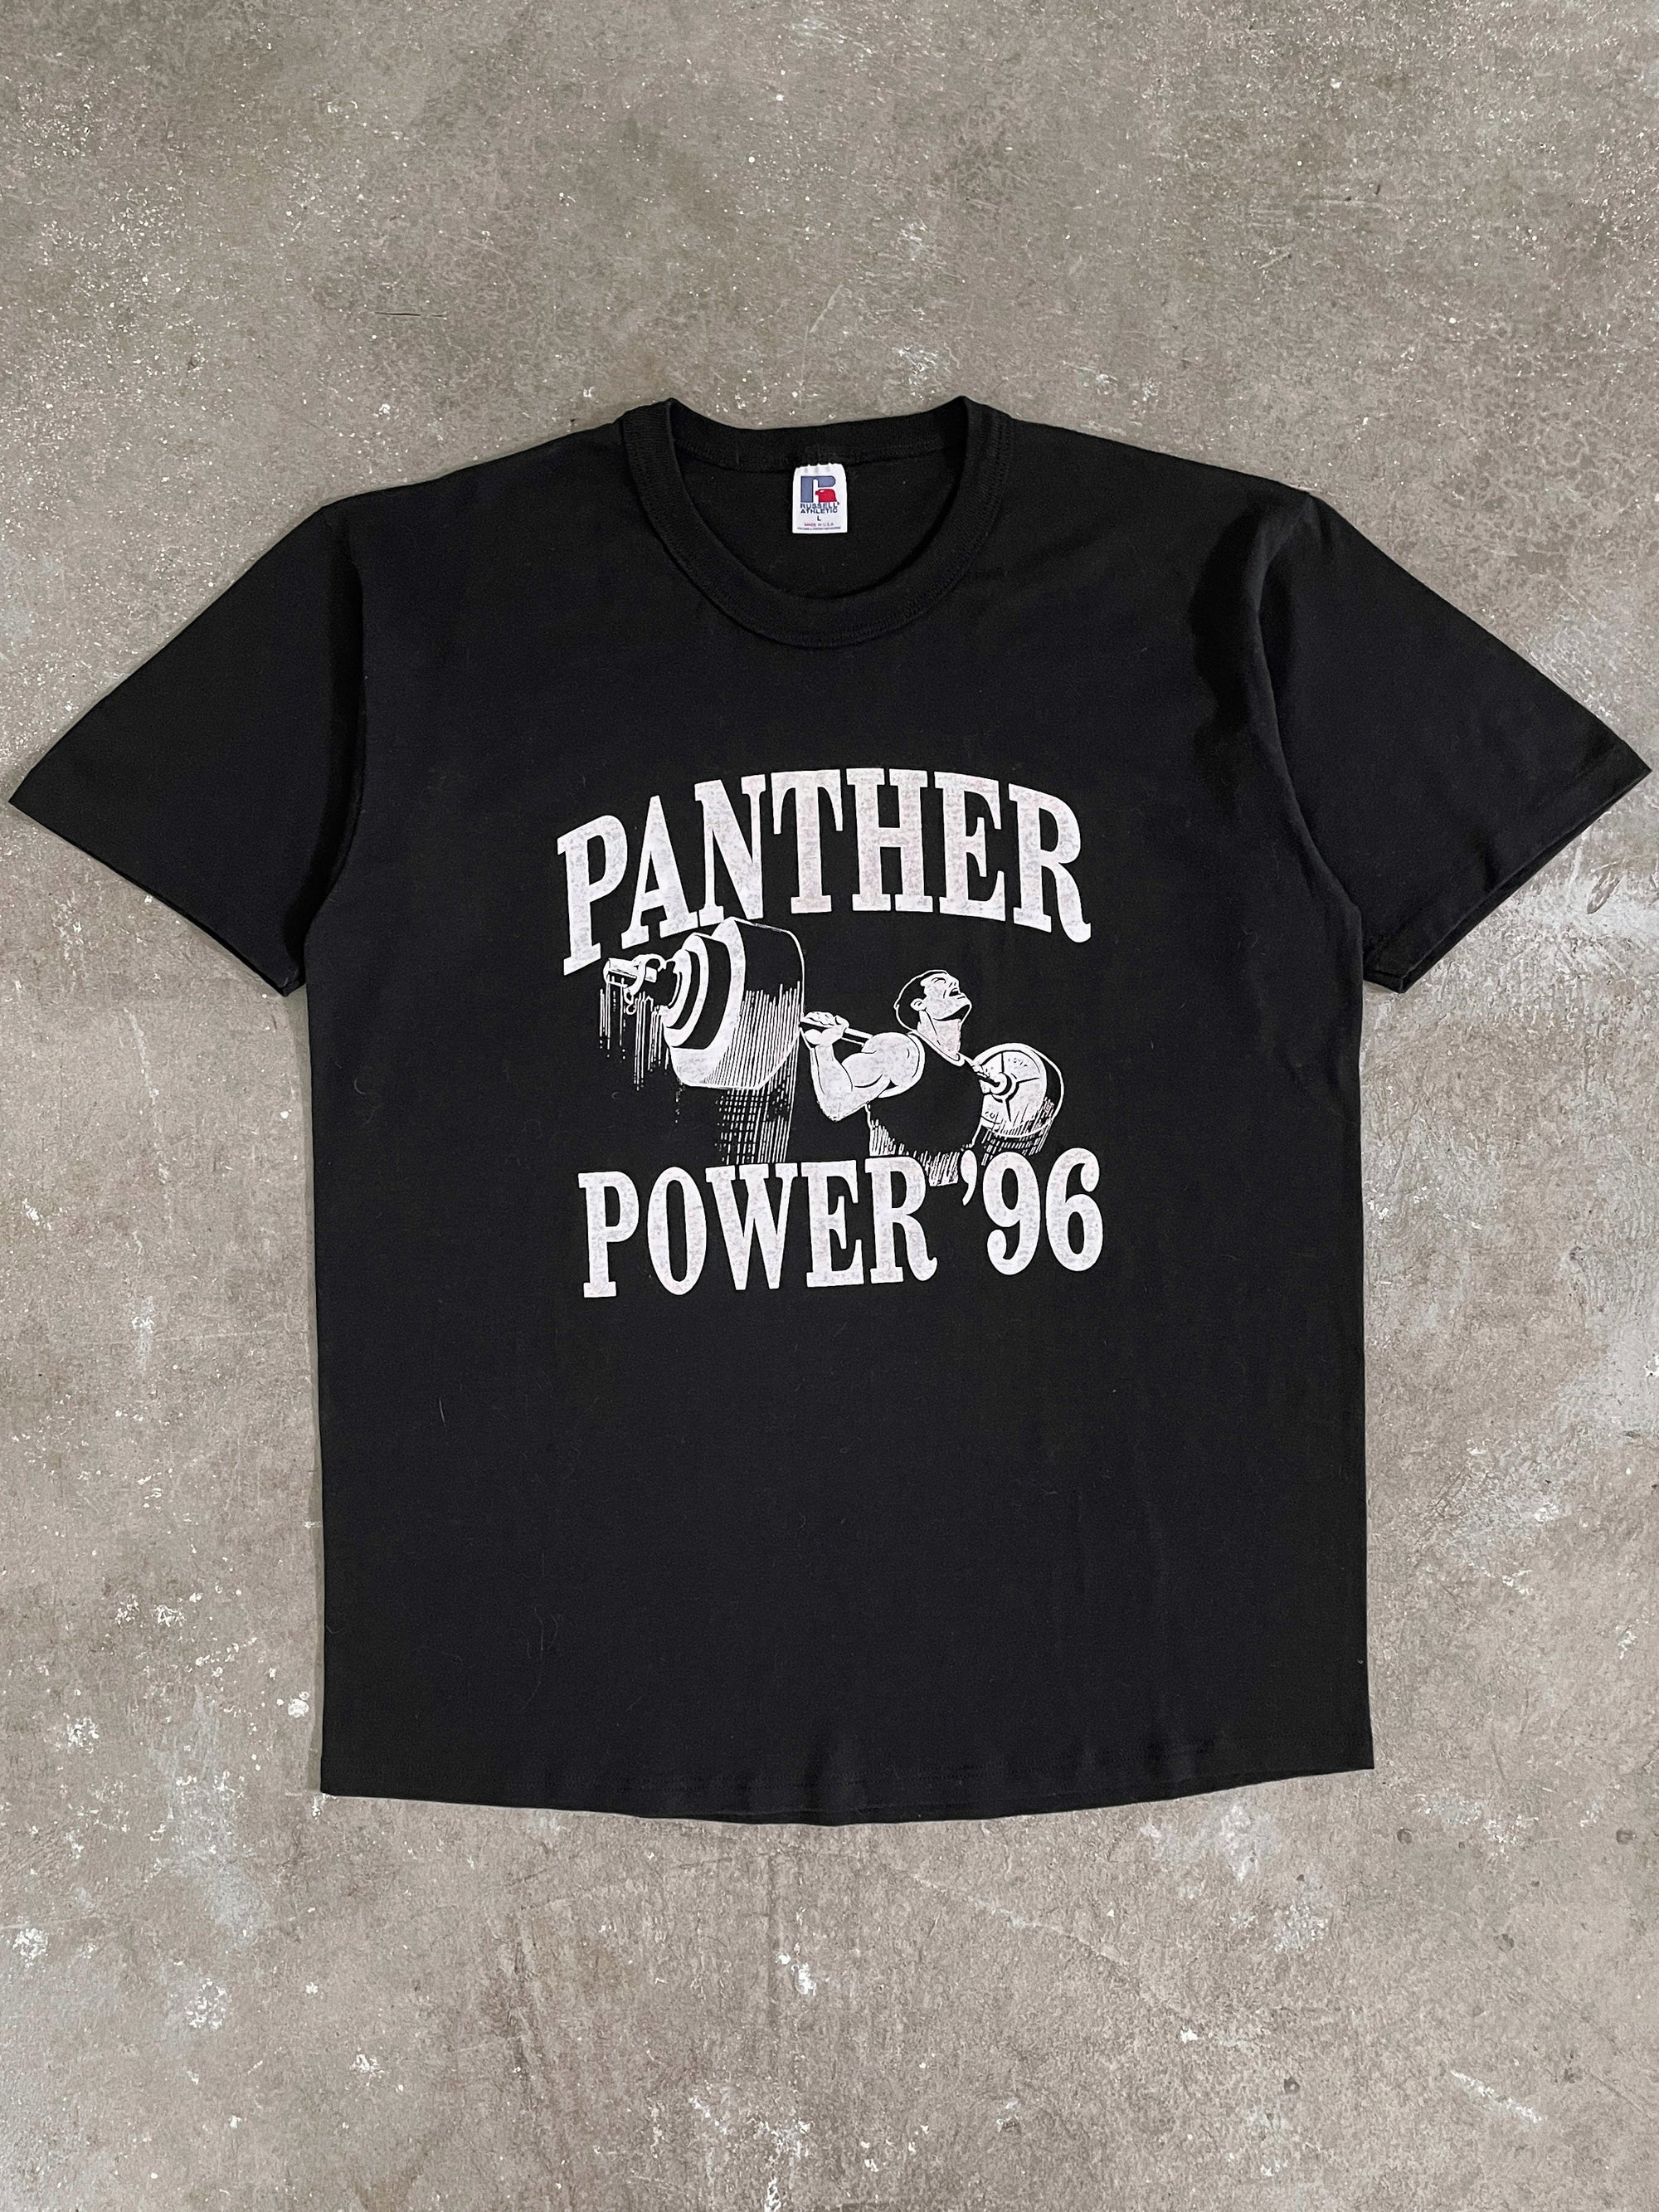 1990s Russell “Panther Power” Tee (L)